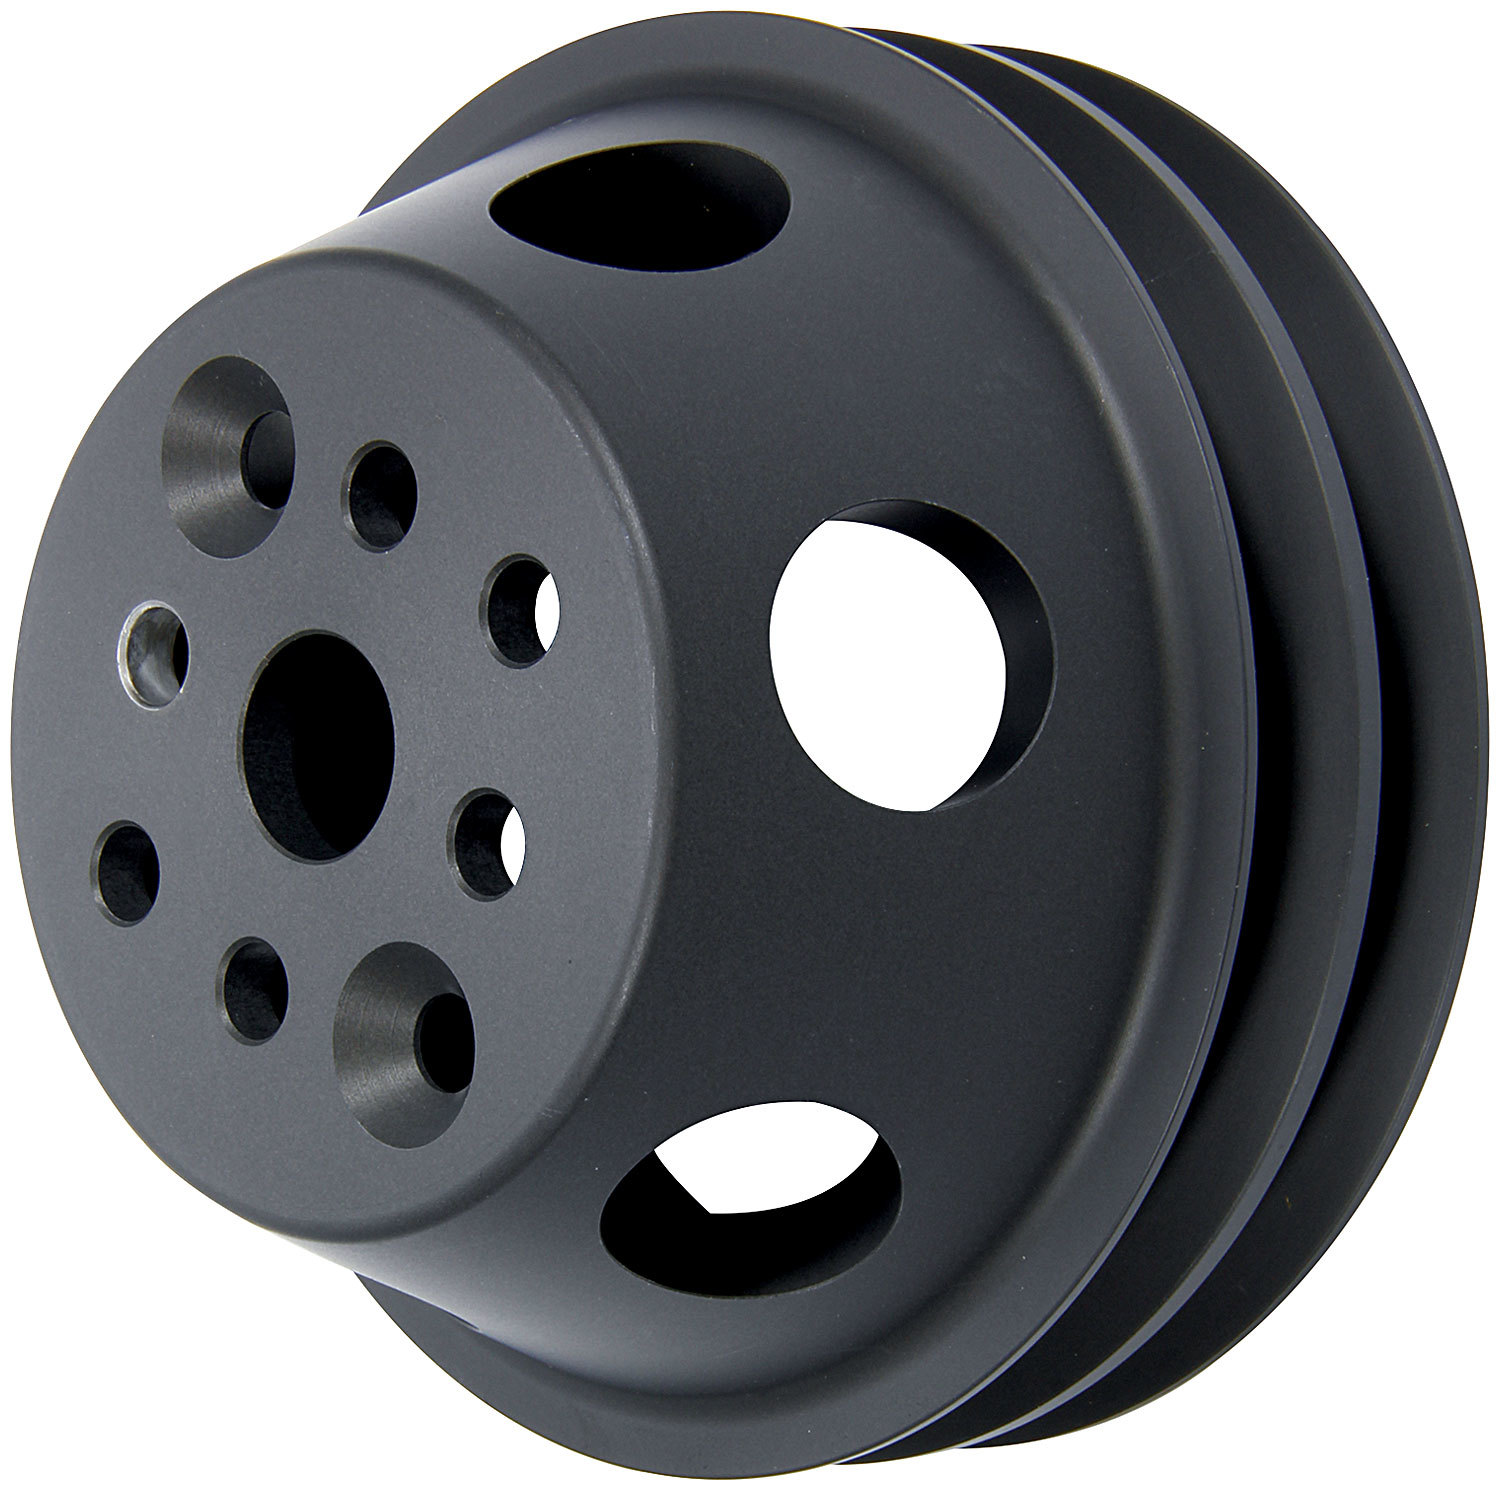 Allstar Performance 31095 Water Pump Pulley, 1 to 1, V-Belt, 2 Groove, 4.750 in Diameter, Aluminum, Black Anodized, Short Water Pump, Small Block Chevy, Each